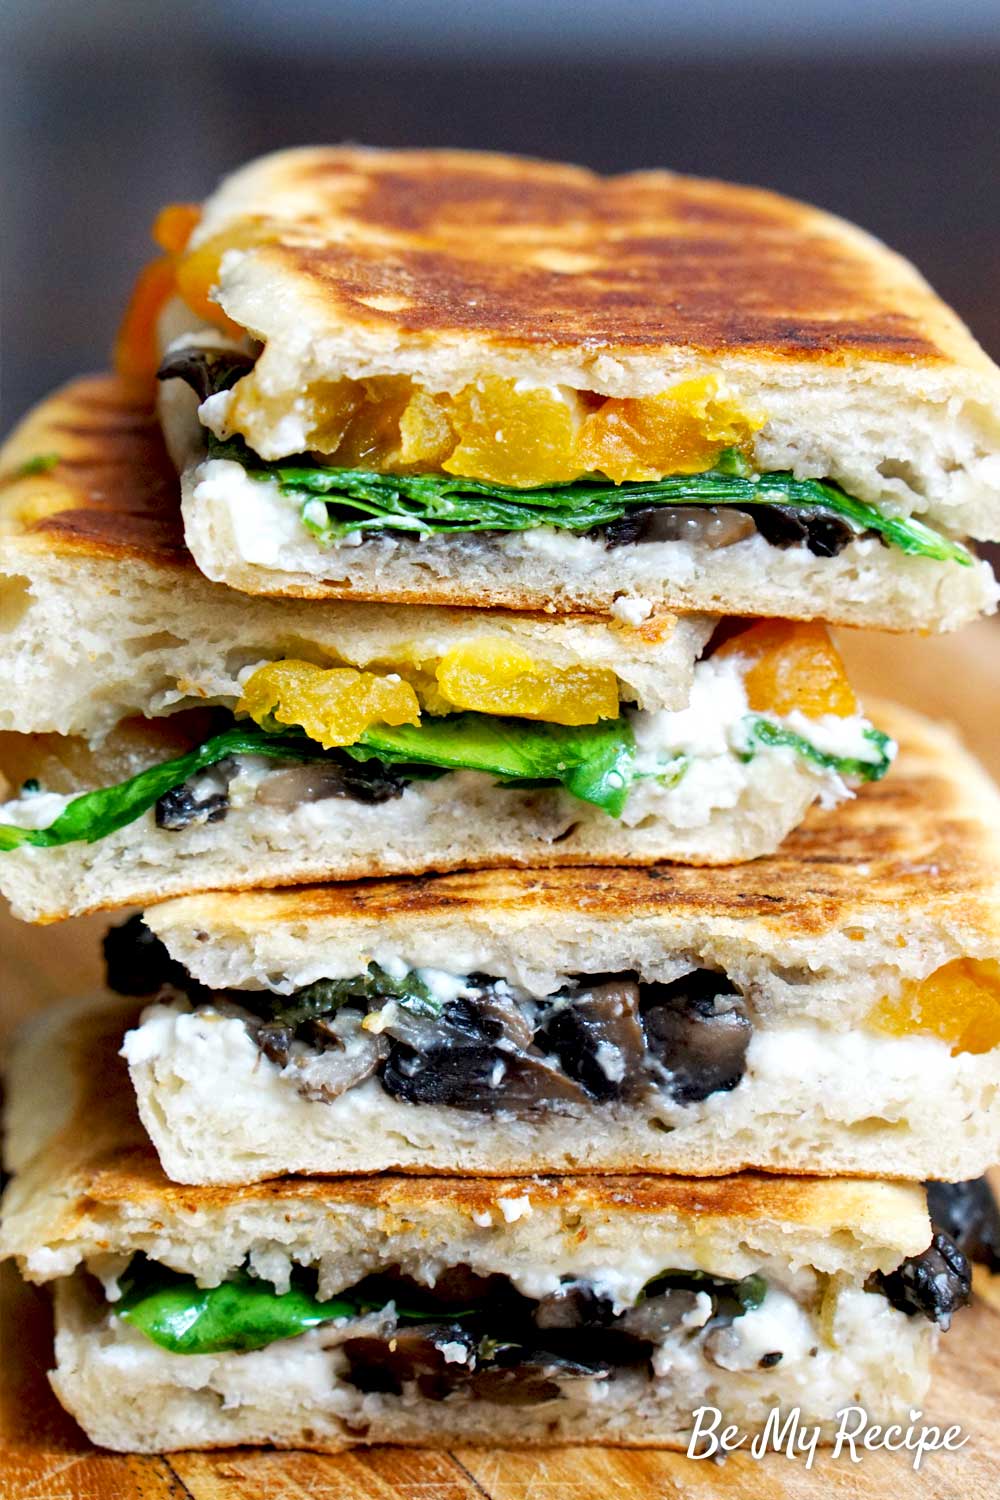 Mouthwatering Mushroom and Goat Cheese Panini Recipe for a Sweet and Salty Surprise